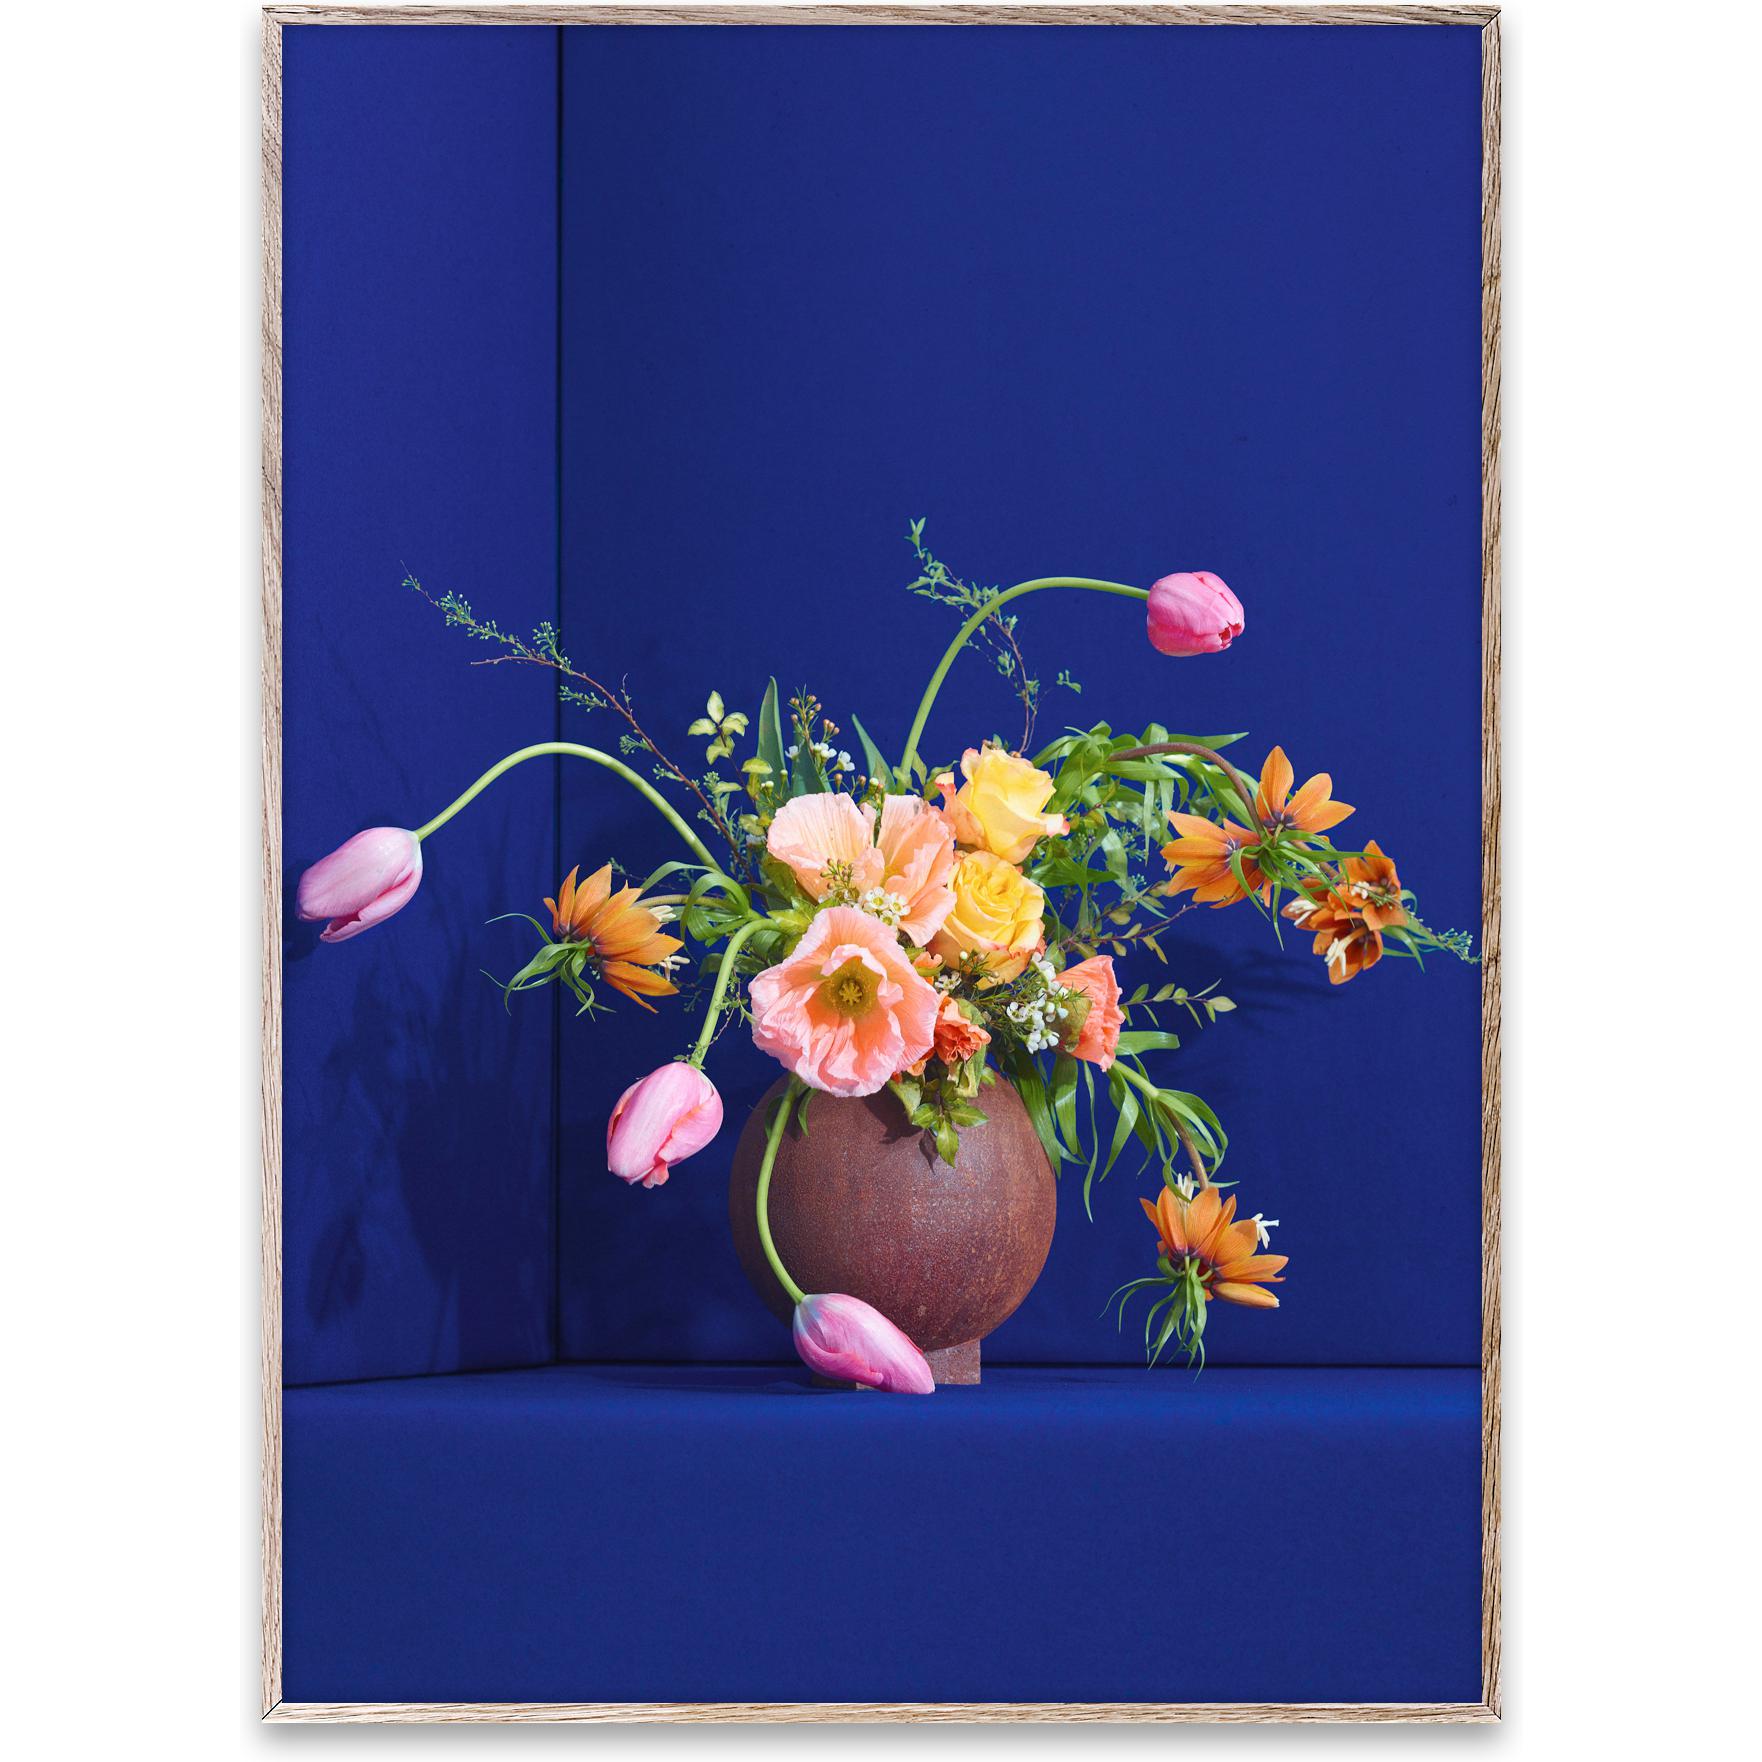 Paper Collective Blomst 01 -poster 70x100 cm, blauw